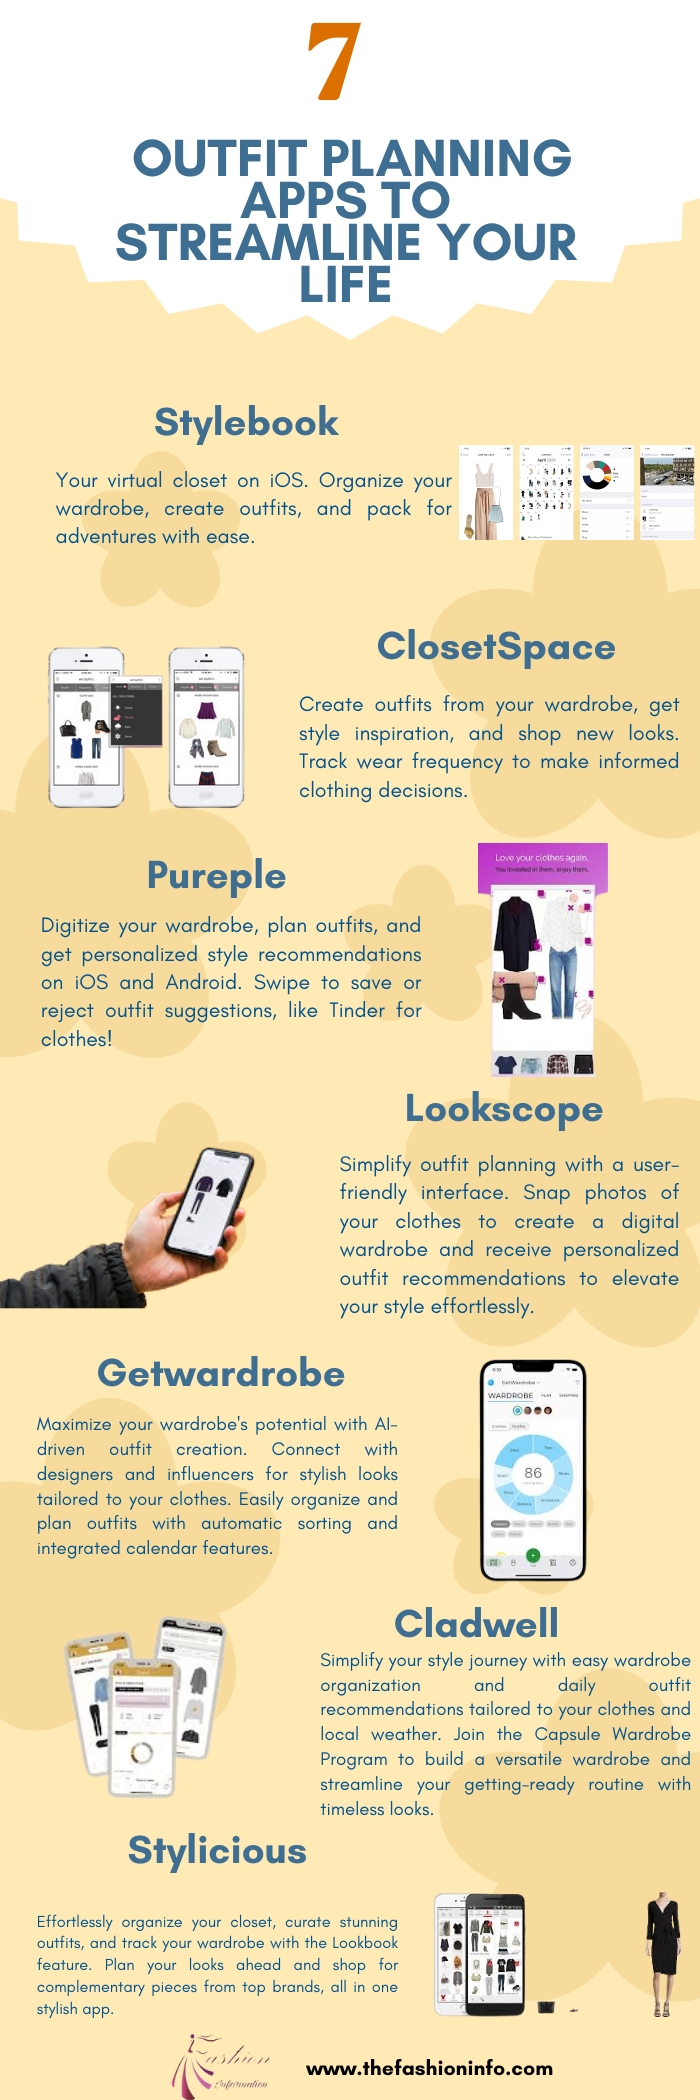 7 Outfit Planning Apps to Streamline Your Life